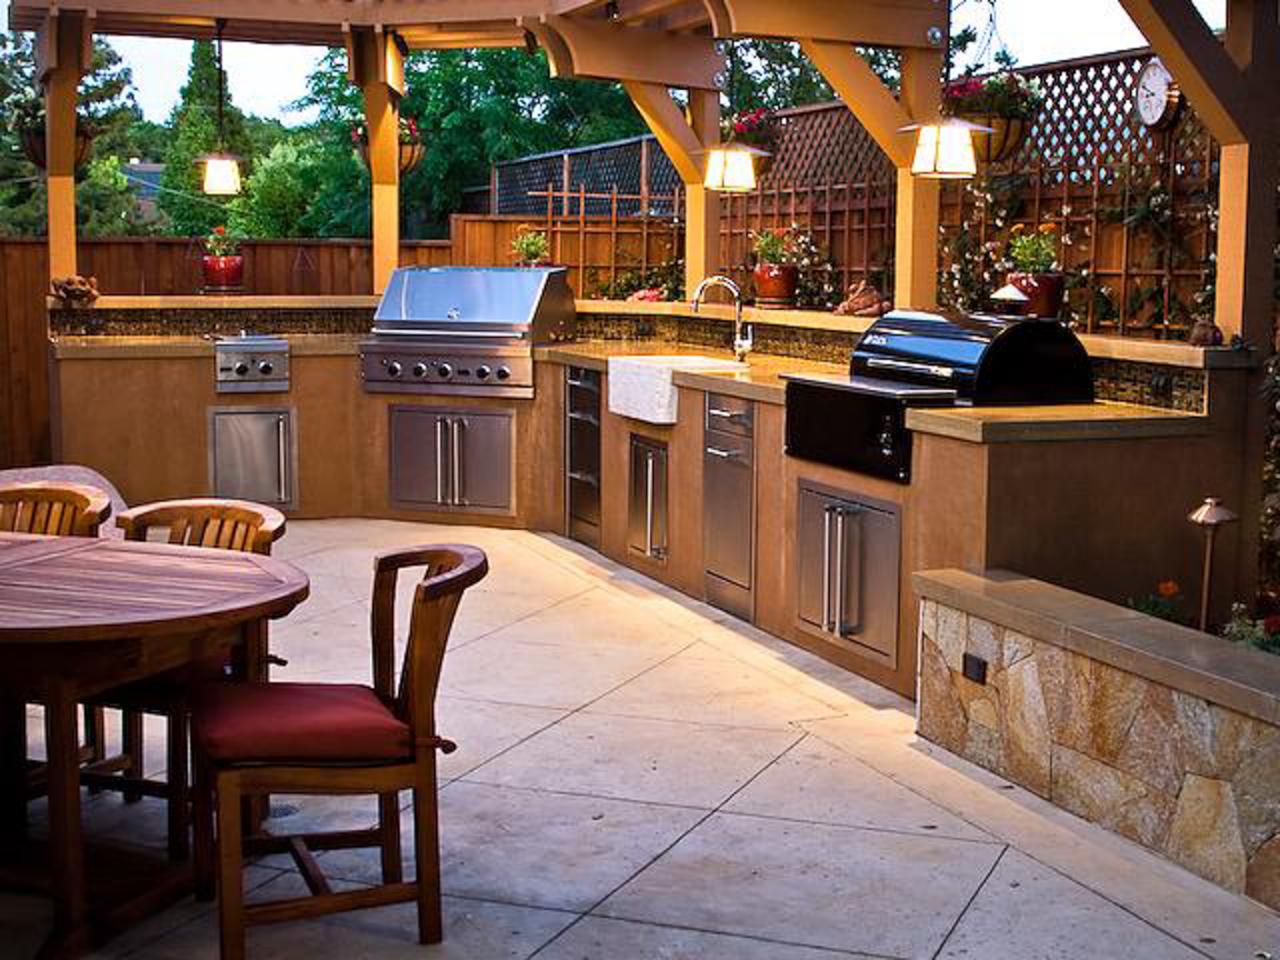 outdoor kitchen pictures photo - 1